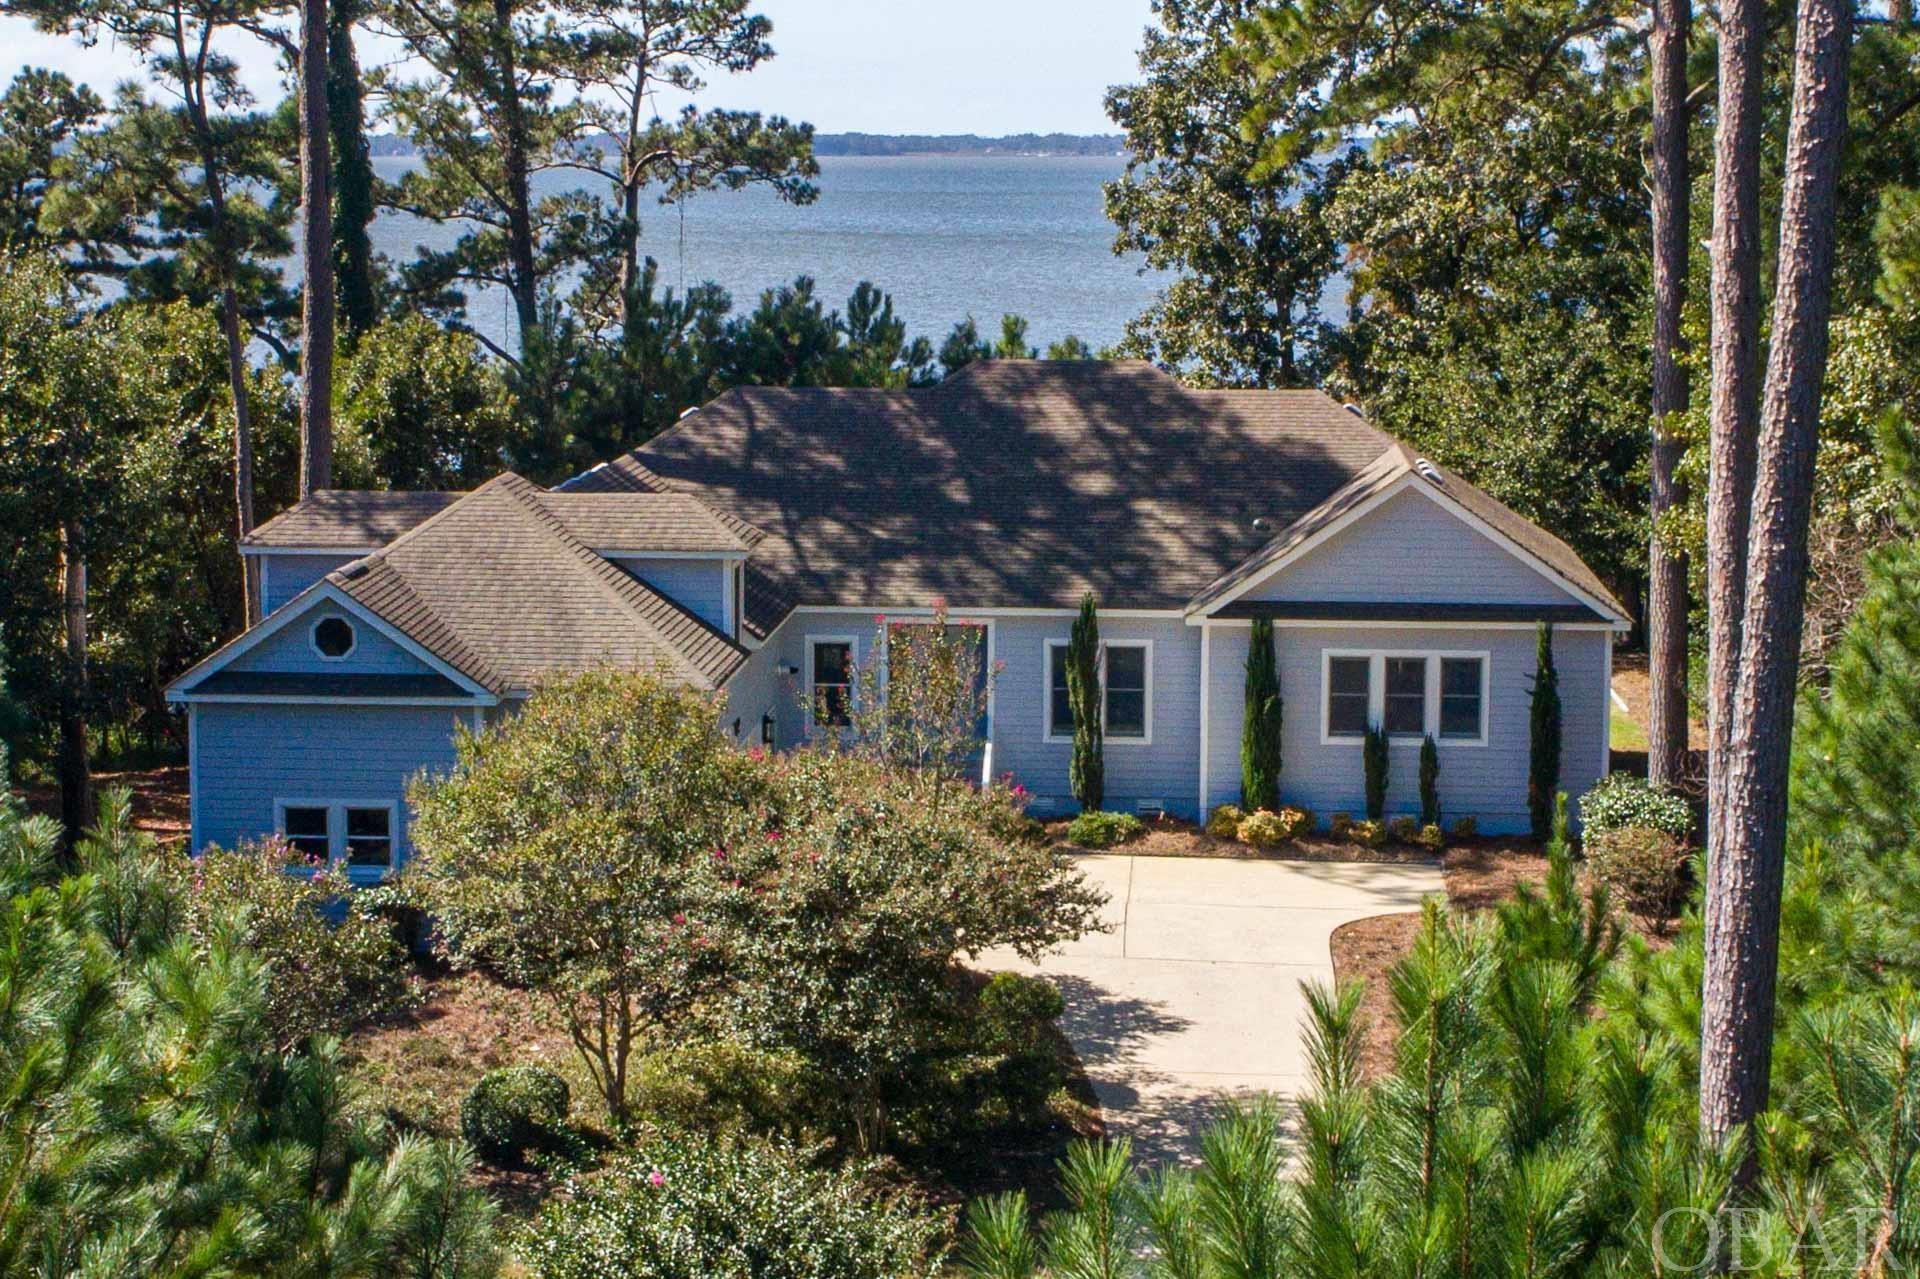 Experience instant tranquility as sunsets grace the waters of this beautifully-maintained coastal home in Martin's Point. Nestled within the sought-after gated community of Martin's Point on the Outer Banks, large parcel (33,500 sq. ft.) offers a serene oasis on the picturesque Currituck Sound. Constructed By renowned OBX Builder Waldt Construction, and gently loved by original owner. As you step into the chandelier-graced vaulted foyer, the Great Room's wall of windows showcases sensational water views, setting the tone for elegant living spaces throughout. The living spaces flow effortlessly, including a formal dining room, a charming home office/library with plantation shutters and custom built-ins, and an open-concept kitchen with informal dining spaces that exude the heart of the home. This single-floor residence (except for Bonus Room) boasts cathedral ceilings, gleaming hardwood floors throughout, 9' ceilings, and a cozy gas fireplace that heats the home extremely well while creating a warm and inviting atmosphere. The chef's kitchen, complemented by a neutral palate, overlooks the pool and the stunning Currituck sound. Offering a gas countertop range, solid surface countertops, loads of cabinetry for extra storage, a disposal, pantry, and center island. A conveniently located rear door off the kitchen and sliders off the great room will take you straight the the gas grill and large sundeck with automatic remote control awning. A great place to watch the children in the pool or be captivated by those famous outer banks sunsets. The generous primary suite features plantation shutters, a gas fireplace with granite surround, amazing water views, and a newly renovated private bath with tile flooring, walk-in tub, double vanity, and separate custom tile shower adorned in soothing colors. Also included in this oversized suite are two ample-size walk-in closets. There are two more spacious bedrooms bedroom each with their own private access to a full bath. One of the bedrooms overlooks the sound and the pool, and has gorgeous custom plantation shutters. Conveniently located off the two car garage is the utility room, with a laundry sink, washer, dryer, and custom shelving. Over the garage is an enormous flex space with a wet bar and mini-fridge. Enjoy tons of storage in this room with a floored attic, and plenty of alcove storage. This area is the perfect space for a game room, media room, or potential to turn into a 4th primary suite, by upgrading the septic and adding a private bath. Discover unique nooks and niches throughout the house, perfect for savoring morning coffee or evening beverages. From the quaint sound-front covered gazebo, the huge sun deck off the great room/kitchen, large pool area, and private pier – you'll have ample spaces to enjoy breathtaking sunsets, crab, launch kayaks and observe lots of wildlife in their natural habitat. The exterior offers a saltwater-solar heated pool, irrigation system in front and back yard operated with an app, natural gas serves fireplace, grill, water heaters (tankless), countertop range, and dryer. Martin’s Point amenities offer 24/7 security at the gated entrance, a private marina with boat ramp and slips, multiple stocked fish ponds, playgrounds, and a waterfront pavilion for hosting gatherings. Additionally, you can take advantage of the yacht club membership and participate in a variety of coastal activities, such as kayak outings, sailboat racing, holiday decor contests, and more.